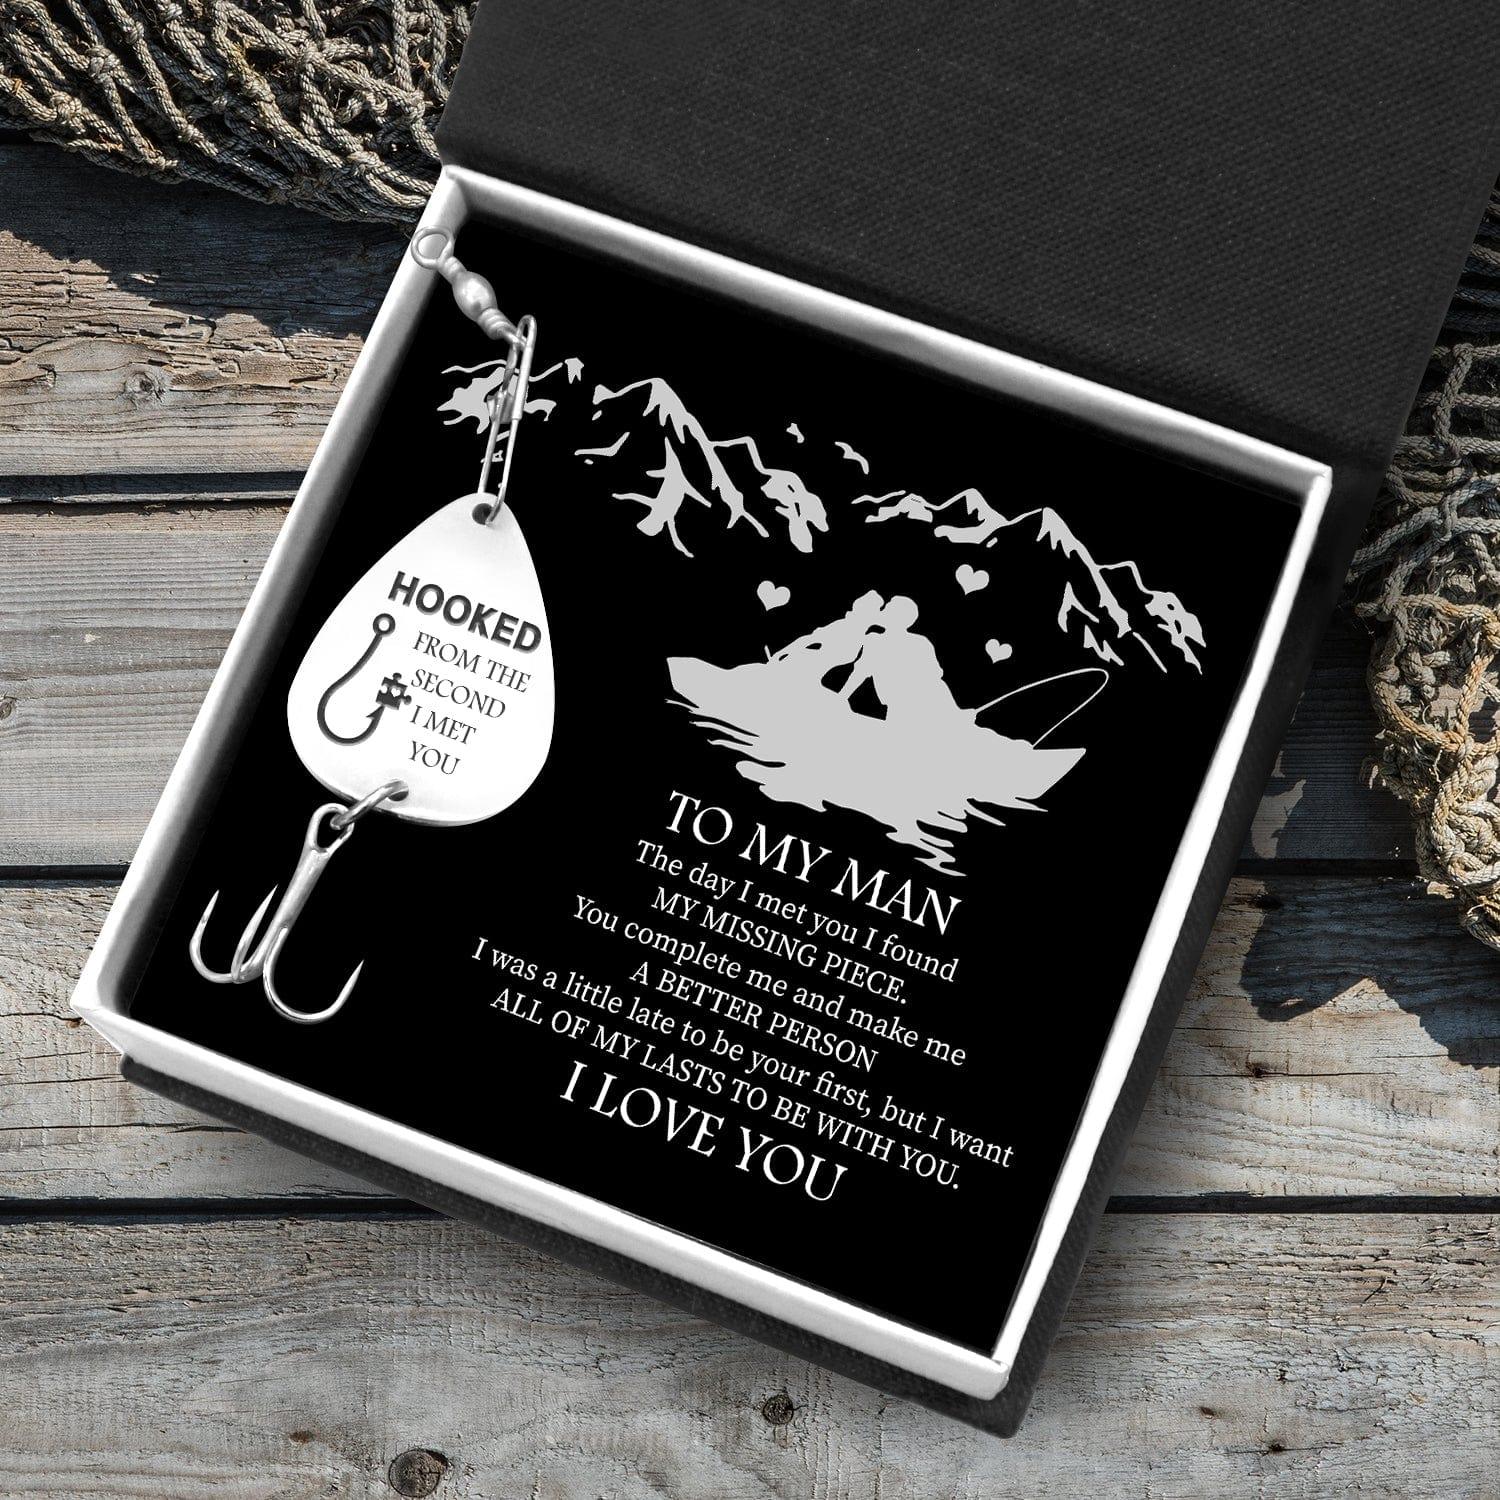 Personalized Engraved Fishing Hook - To My Man - The Day I Met You - Augfa26016 - Gifts Holder